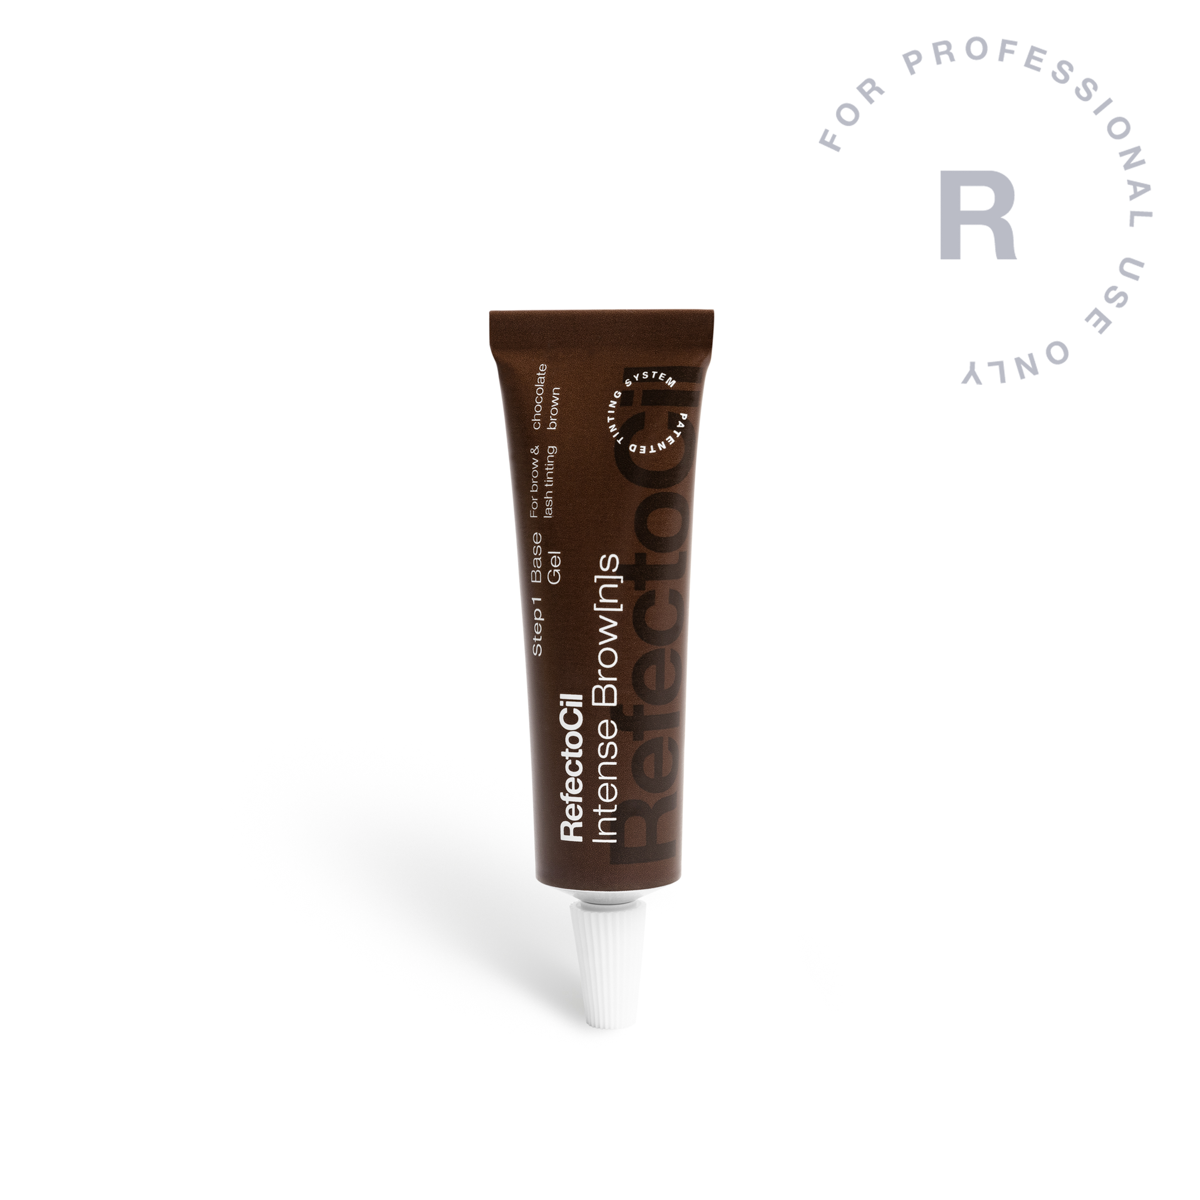 RefectoCil Intense Brow[n]s - Base Gel 15ml - Creata Beauty - Professional Beauty Products